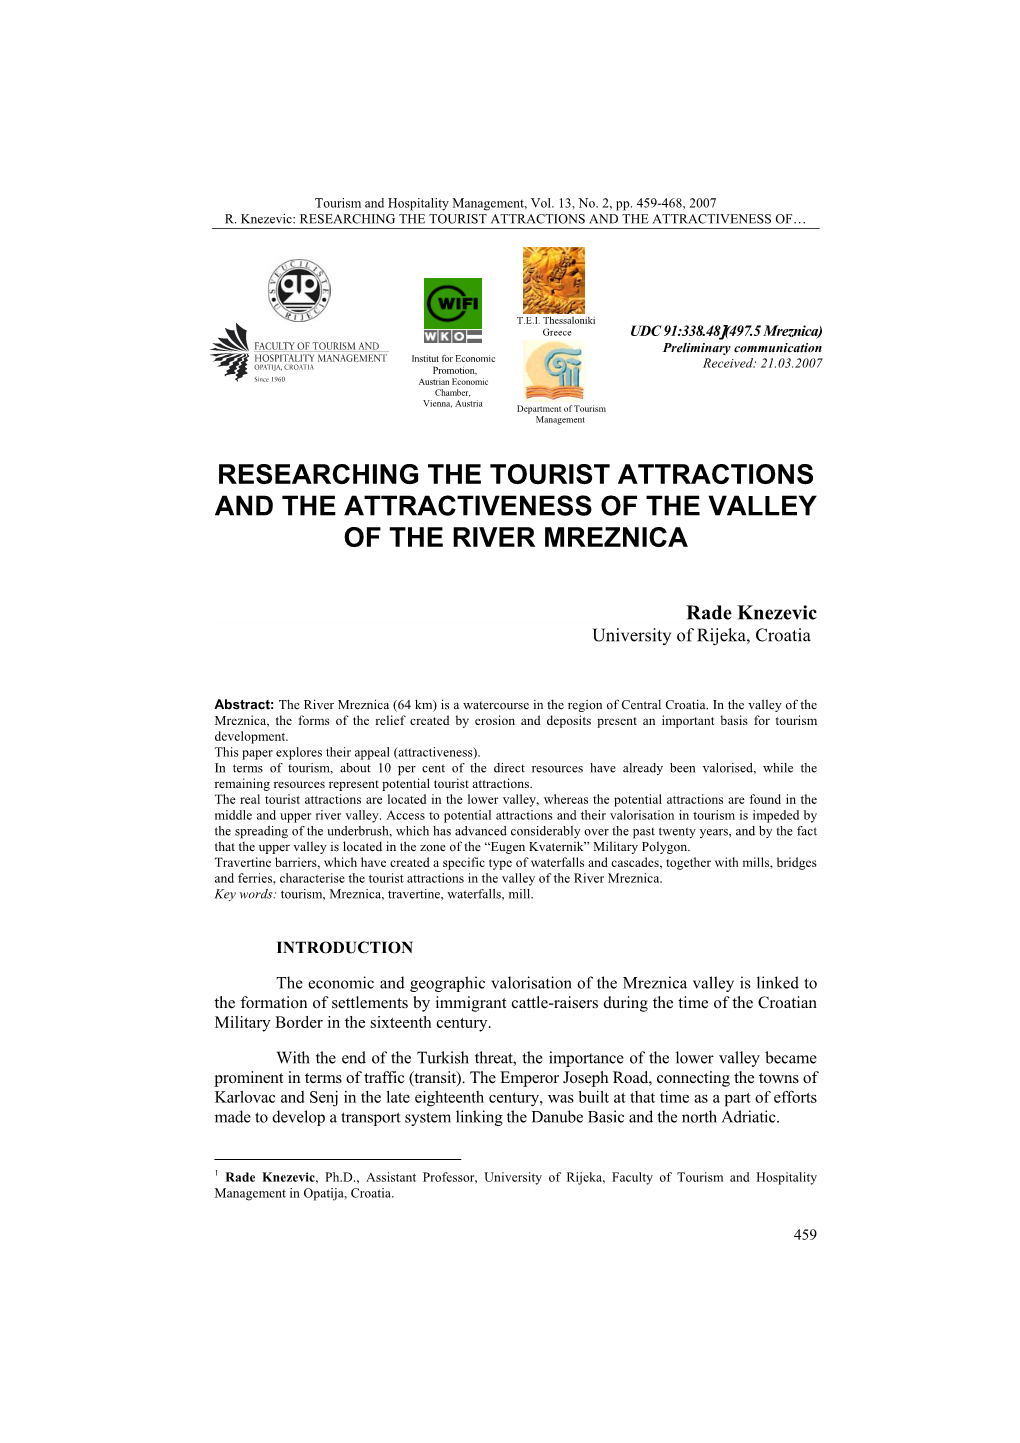 Researching the Tourist Attractions and the Attractiveness Of…